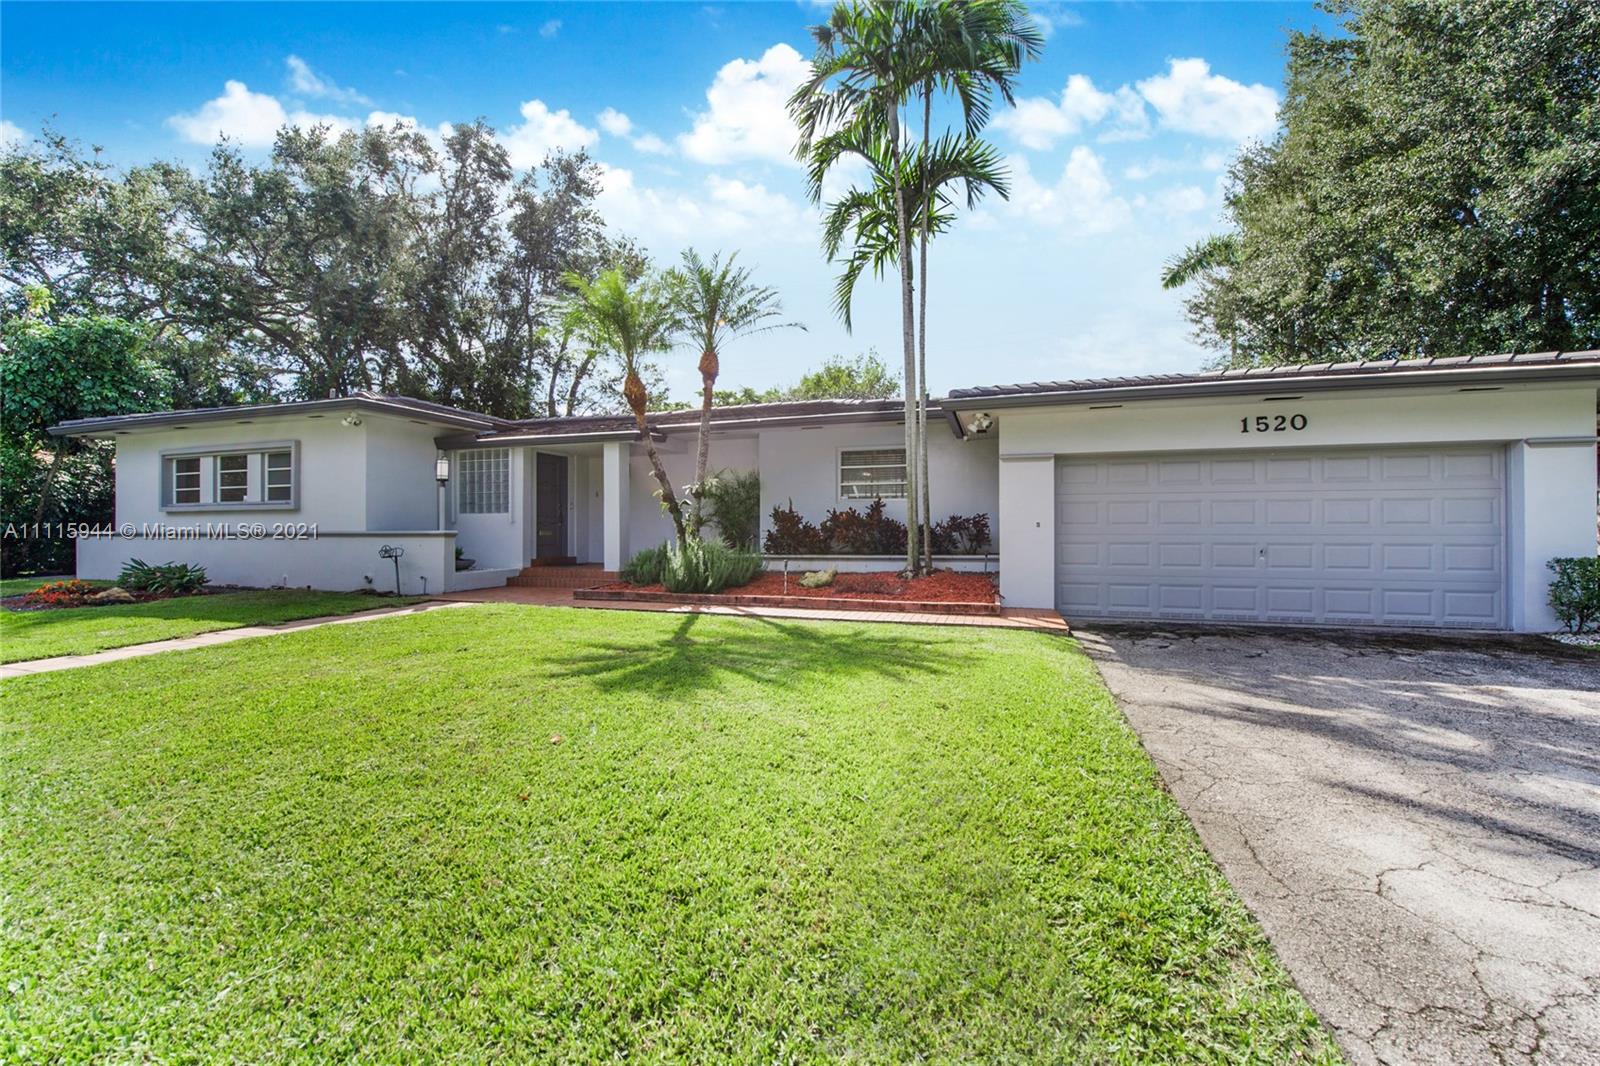 Great house, walk to UM close to South Miami! 10,000 SqFt lot, split plan, 3 bedroom 4 full bathrooms including priovate main bedroom suite, very open floor plan. Lots of natural light, new flat tile roof installed 2019, A/C units installed 2019 & 2011, water heater in 2018. Large pool deck, partial home generator and much more. Easy to show, call listing agents!